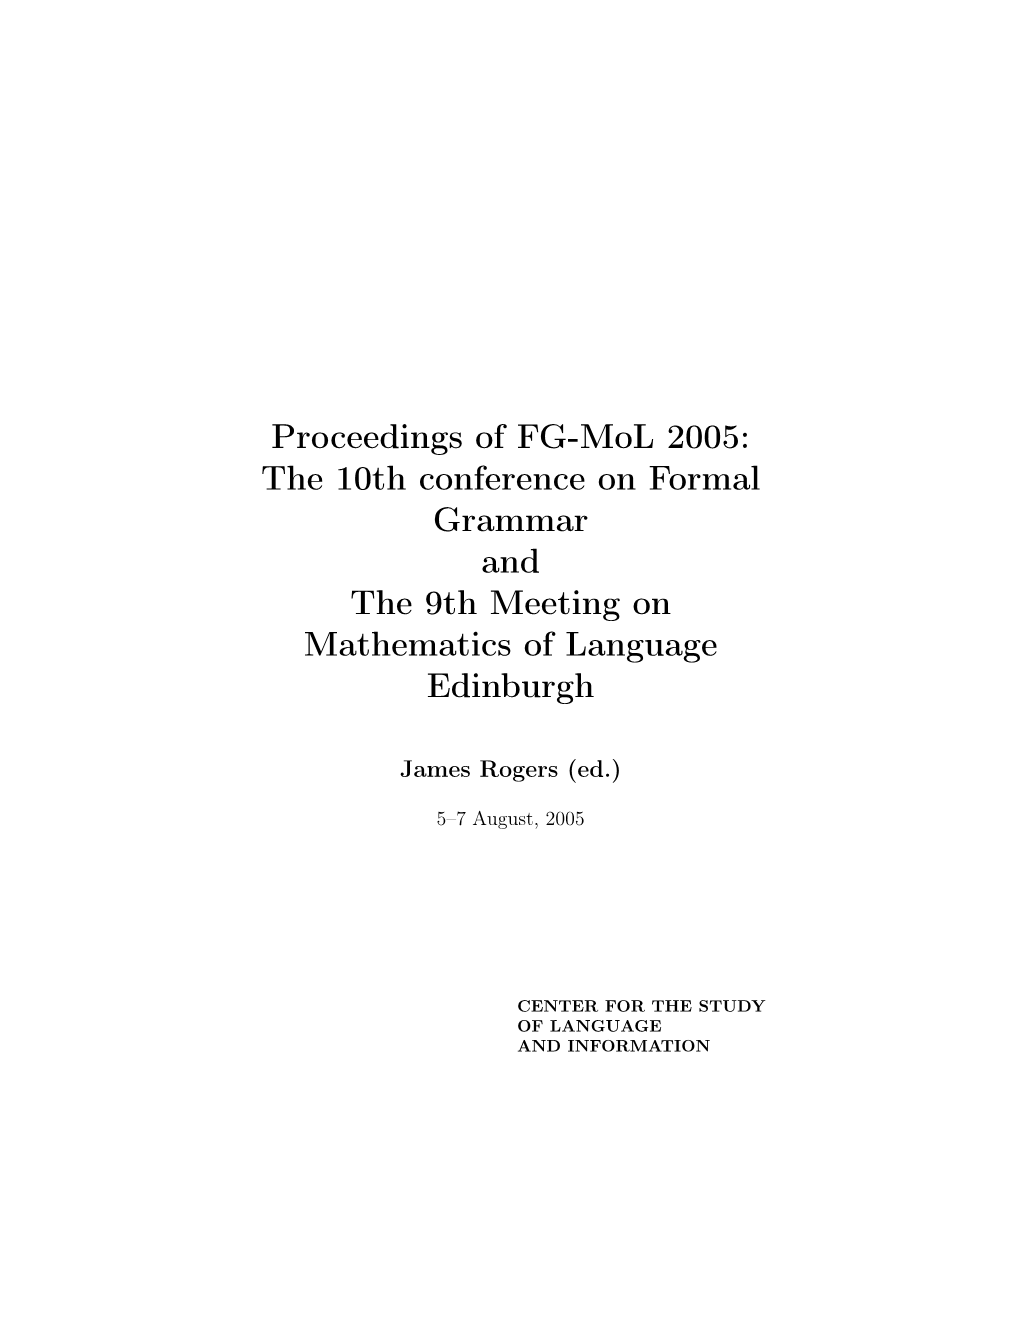 Proceedings of FG-Mol 2005: the 10Th Conference on Formal Grammar and the 9Th Meeting on Mathematics of Language Edinburgh